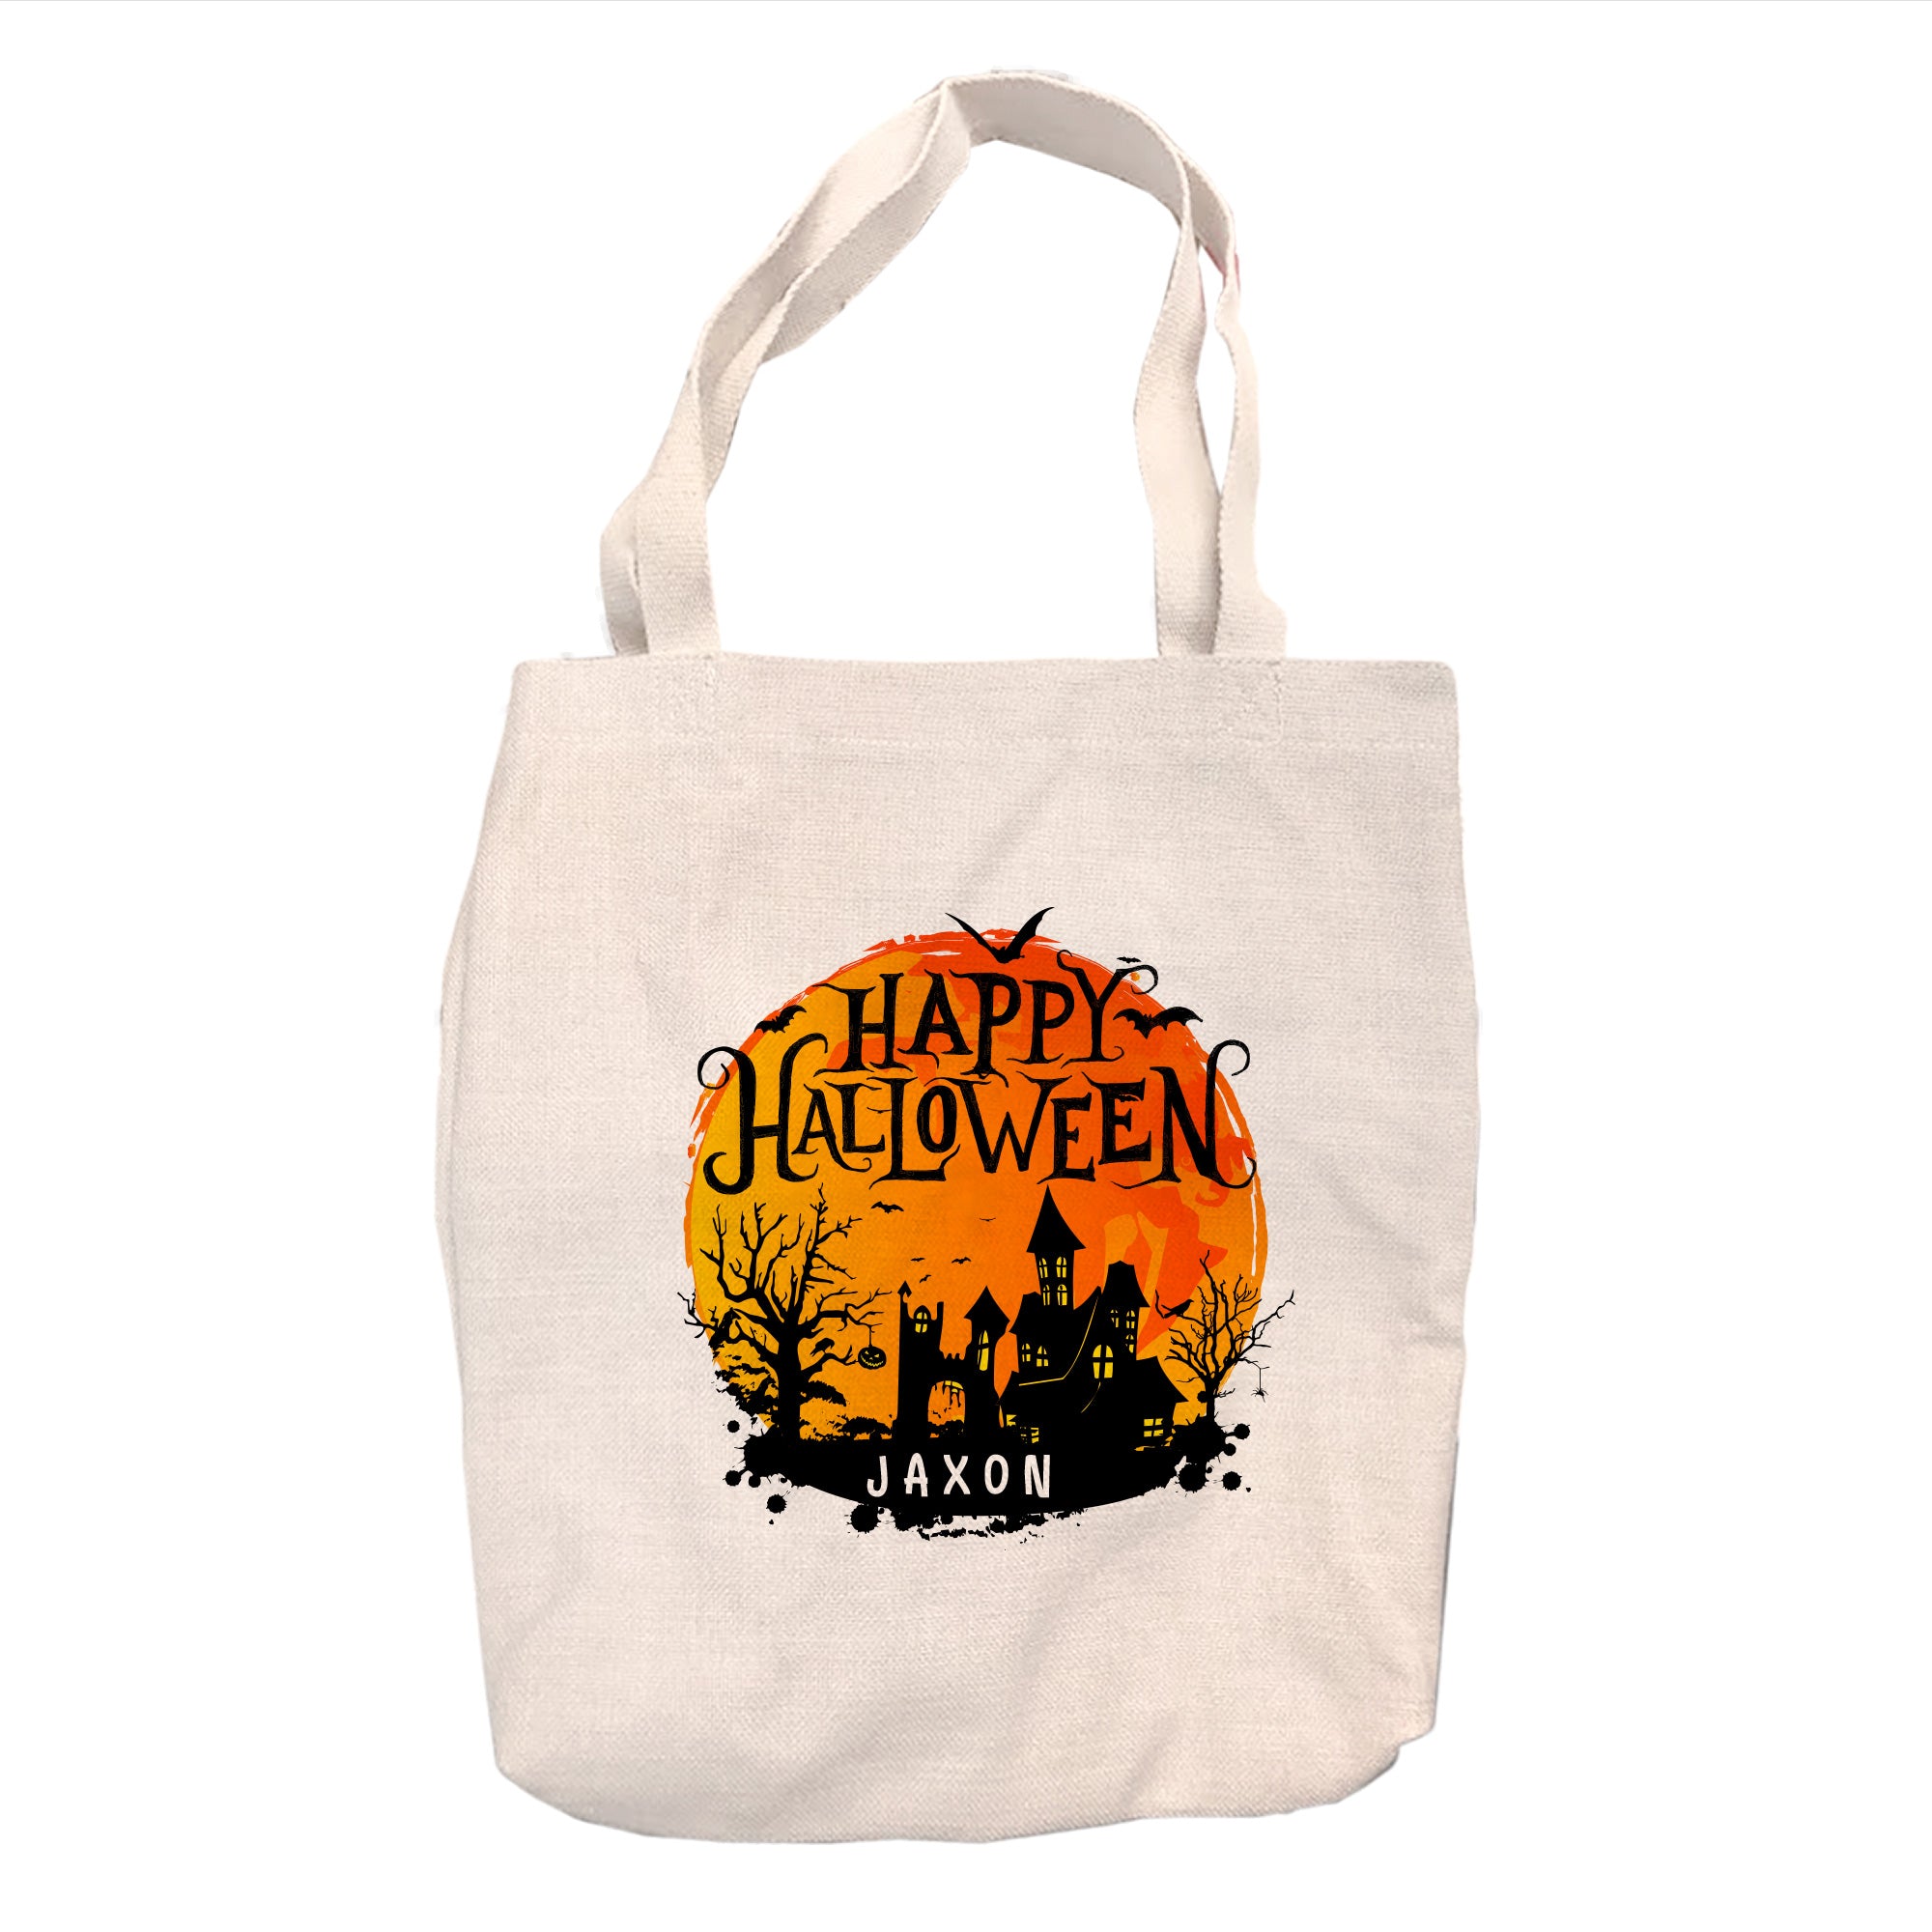 Pattern Pop - Personalized Halloween Tote Bag - Graphic Canvas Tote Bag - Personalized Candy Bag for Trick or Treat - 16” x 14.5